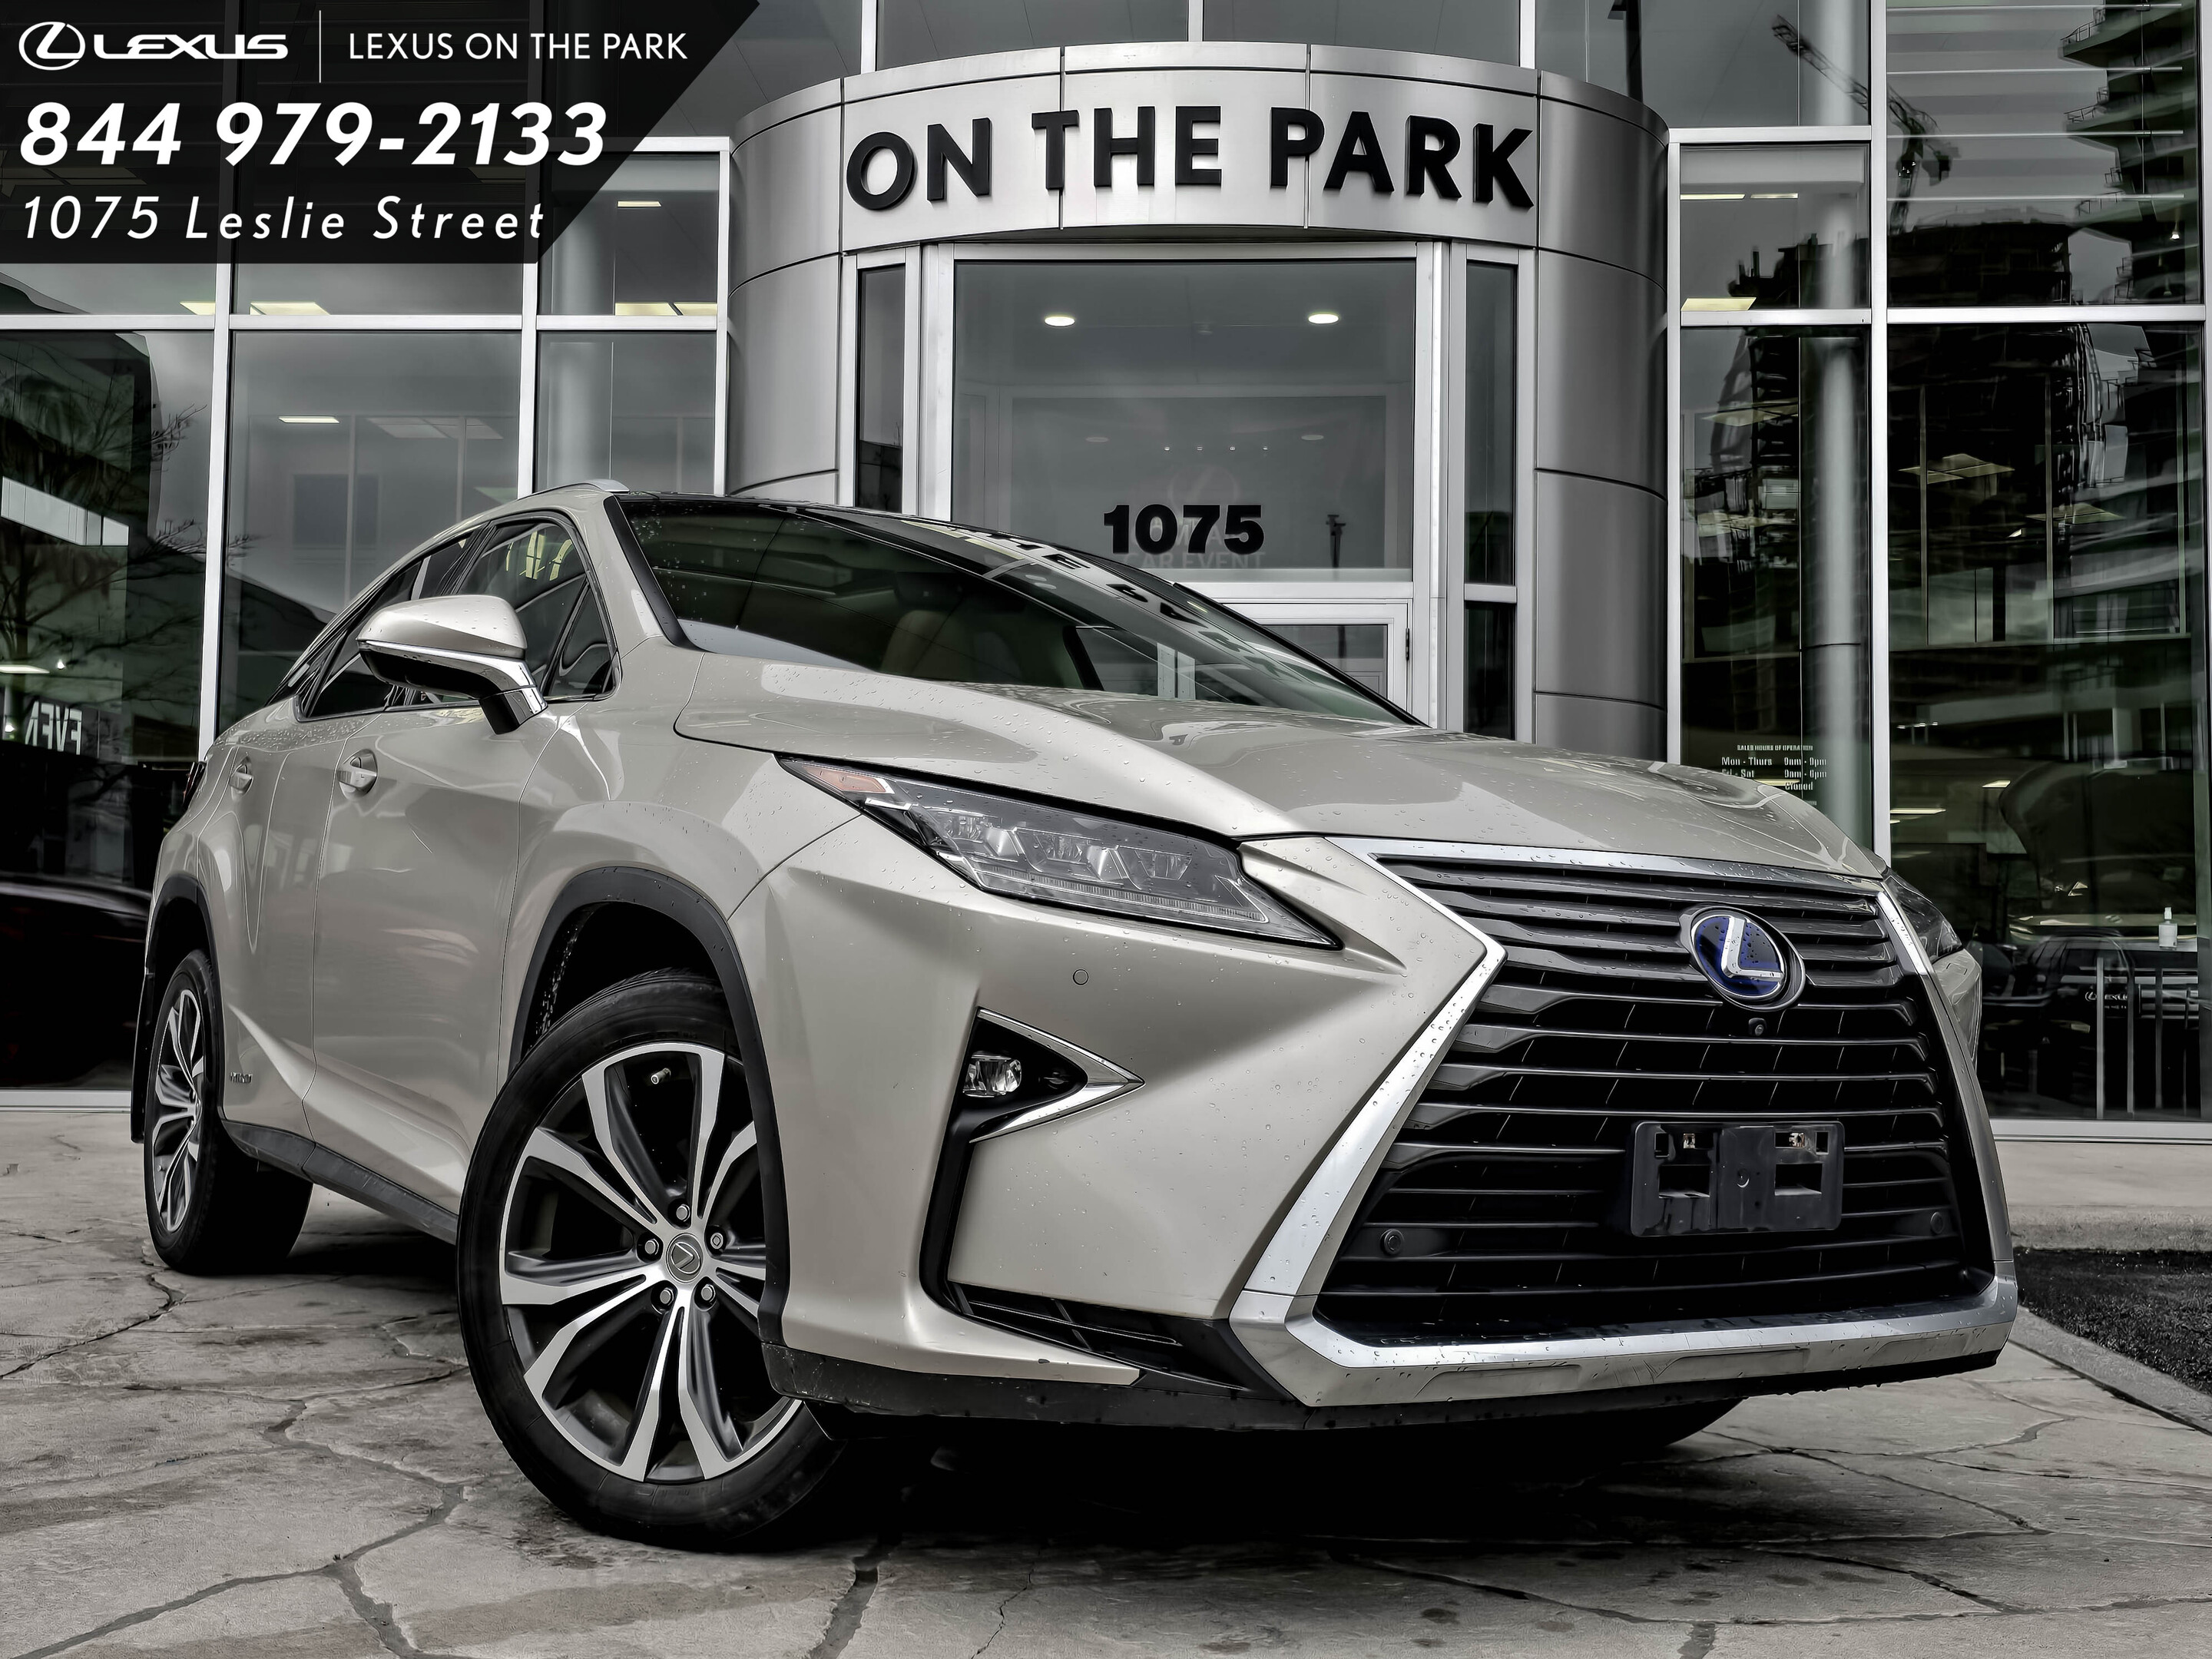 2016 Lexus RX 450H Executive Pkg|Safety Certified|Welcome Trades|